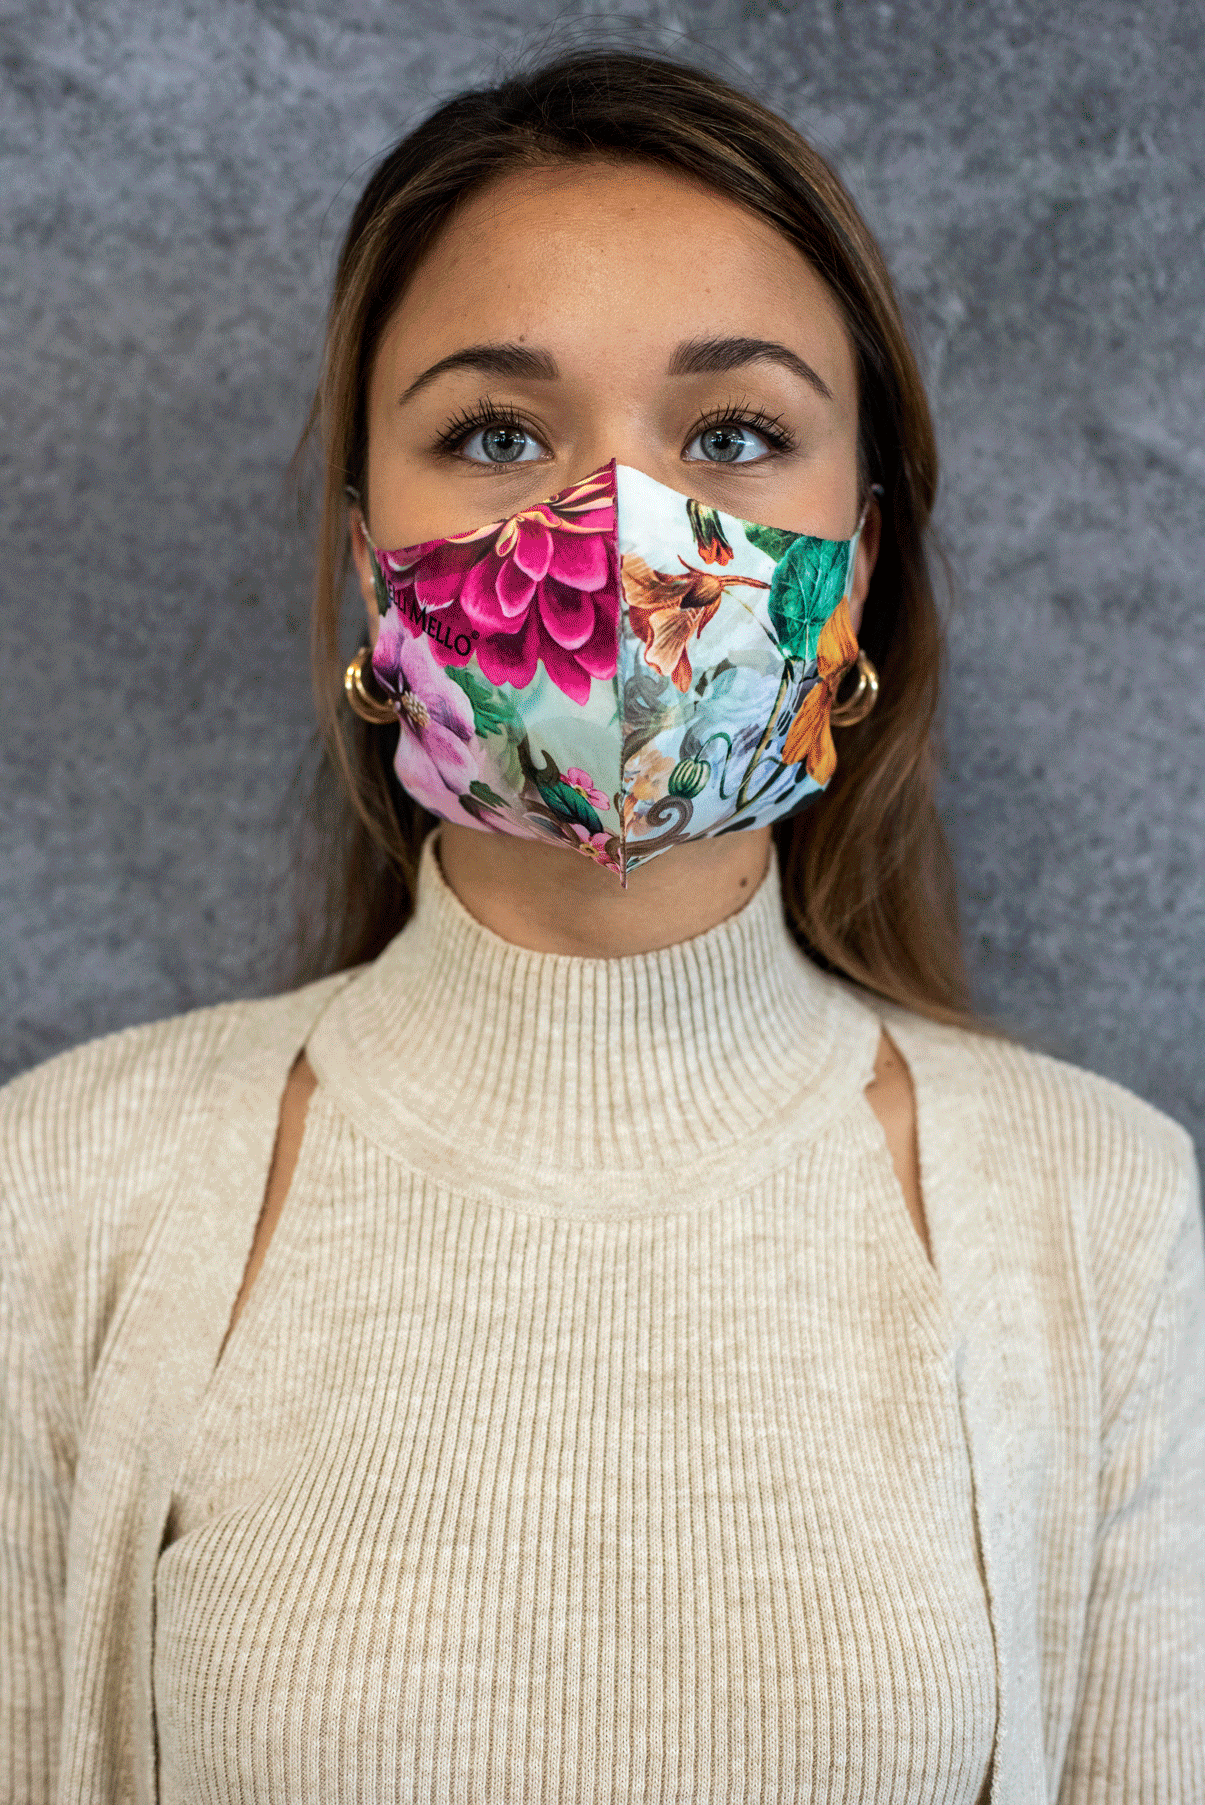 Melli Mello floral mouth mask high quality waterproof UV protection Air filtration PM2.5 anti bacterial facemask with air filtration 180 view